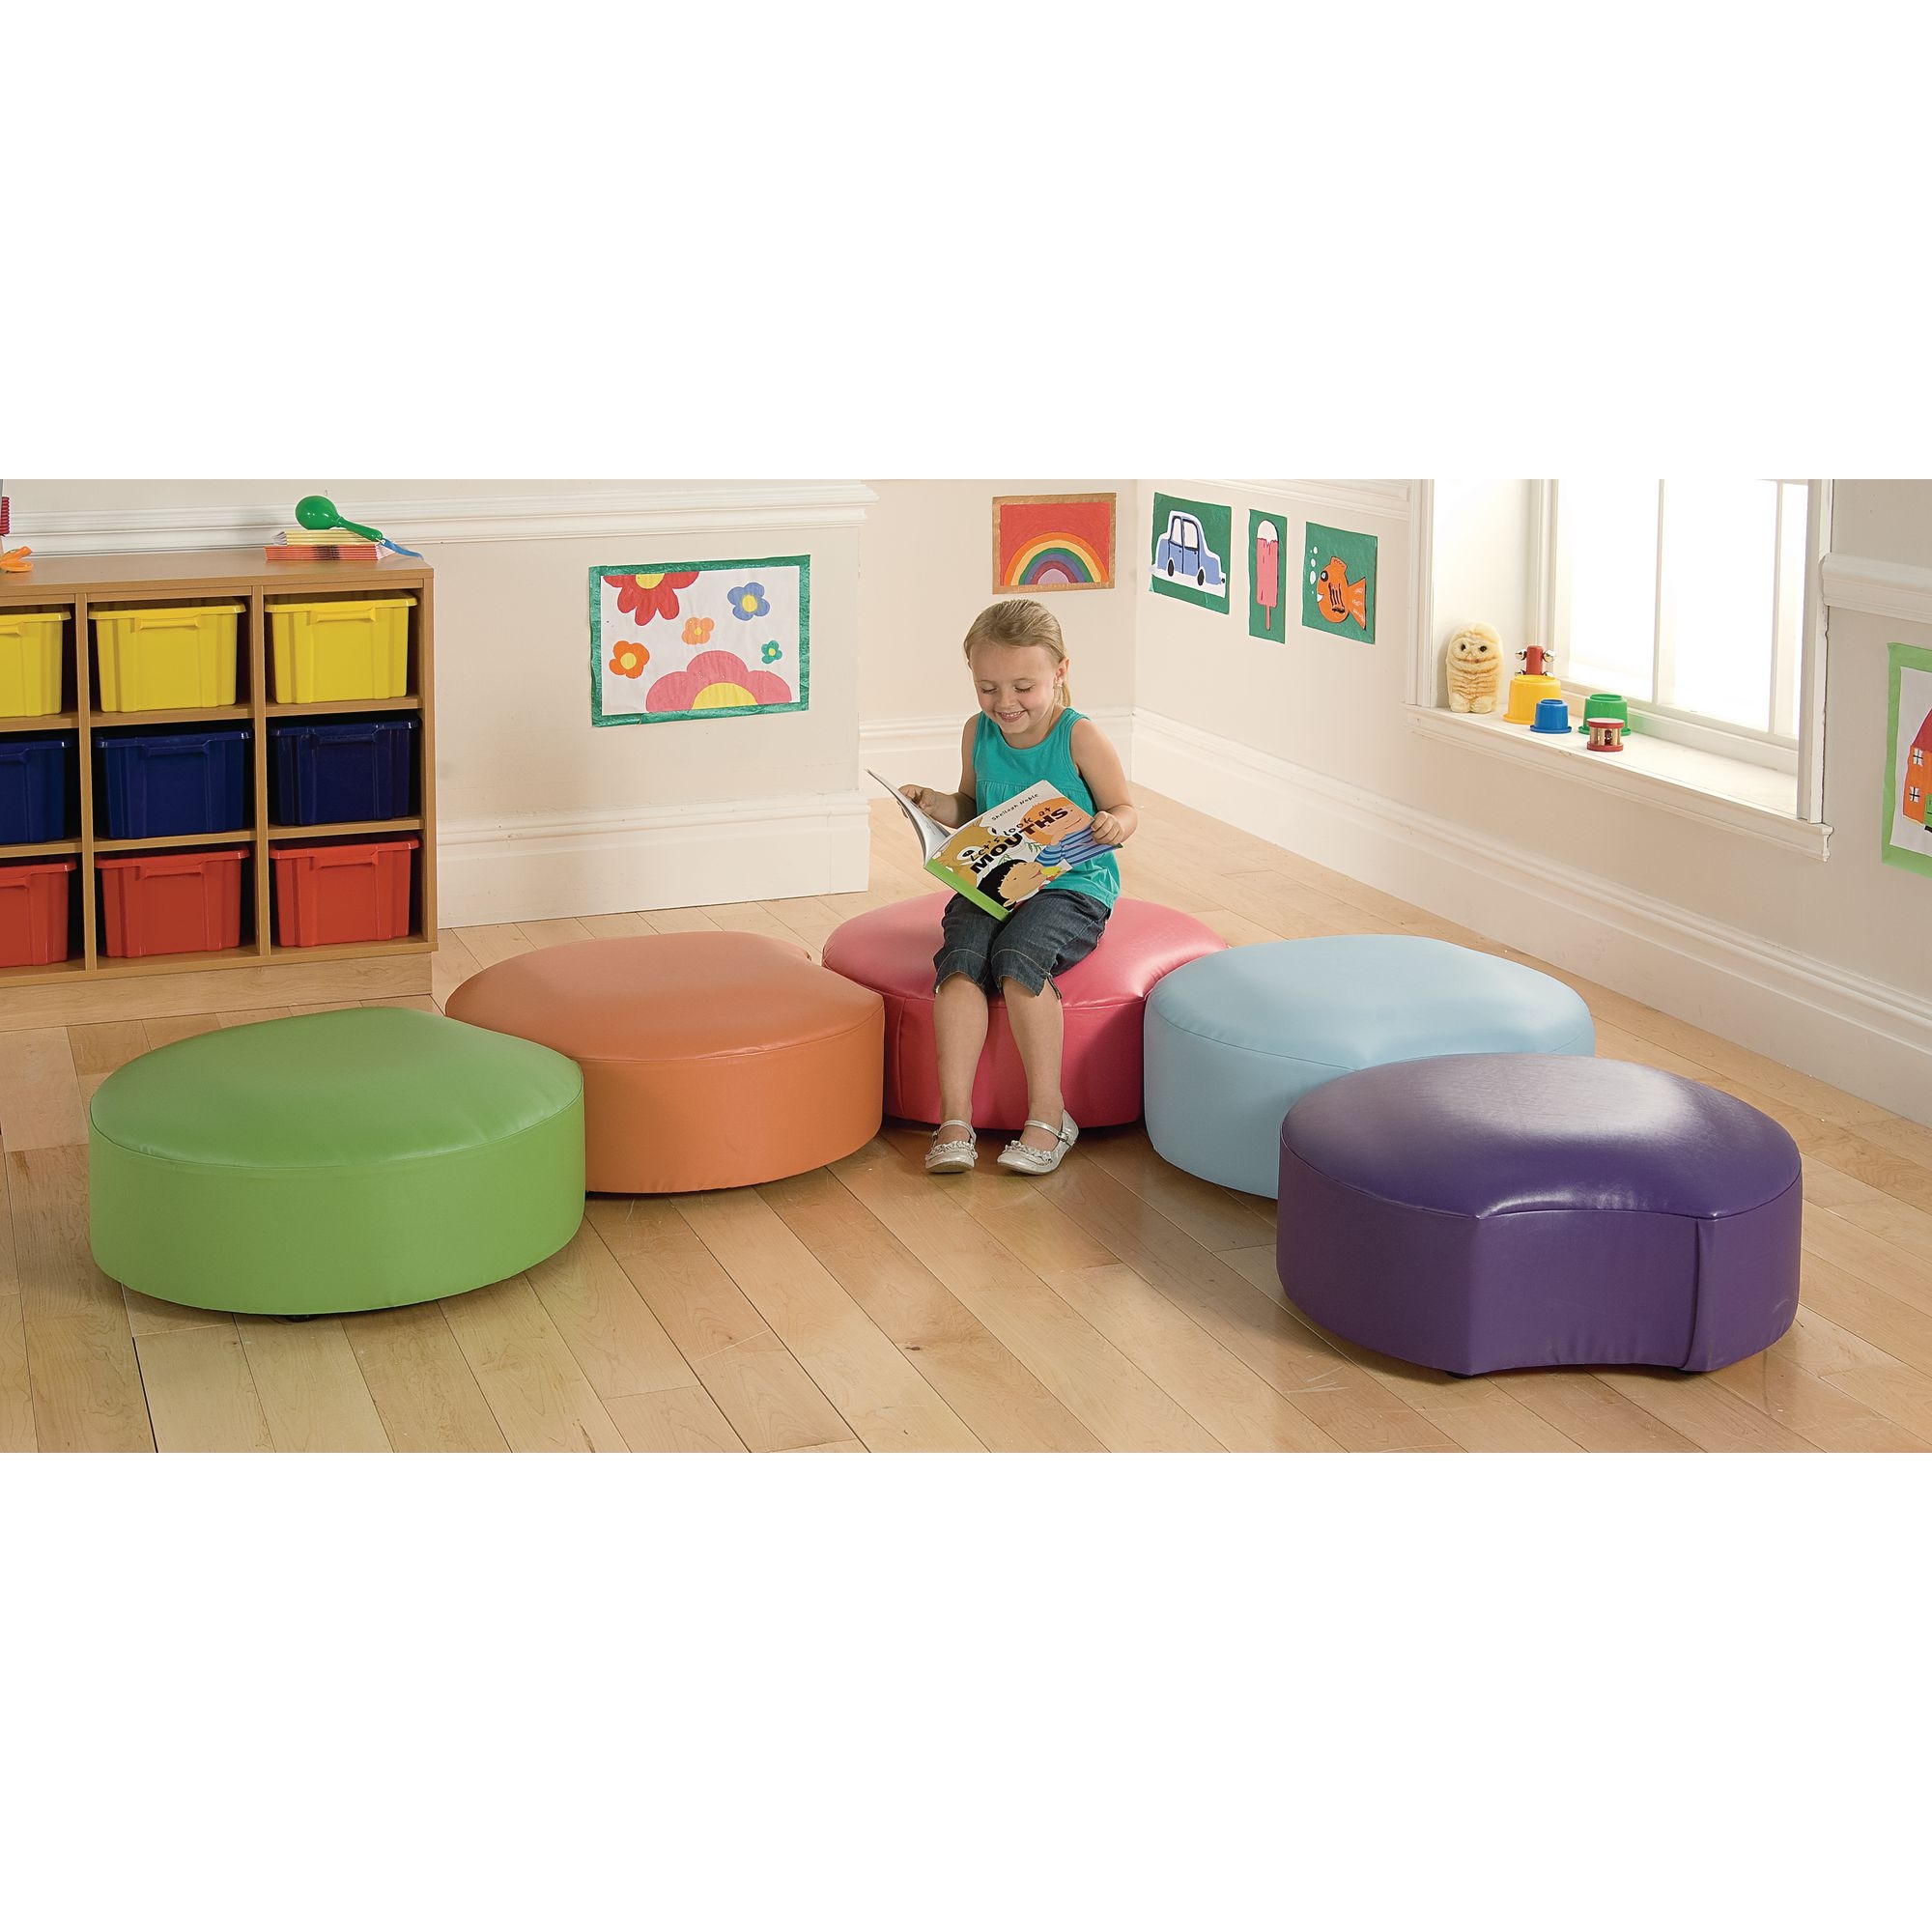 Snuggle Seating - Brights Pack of 5